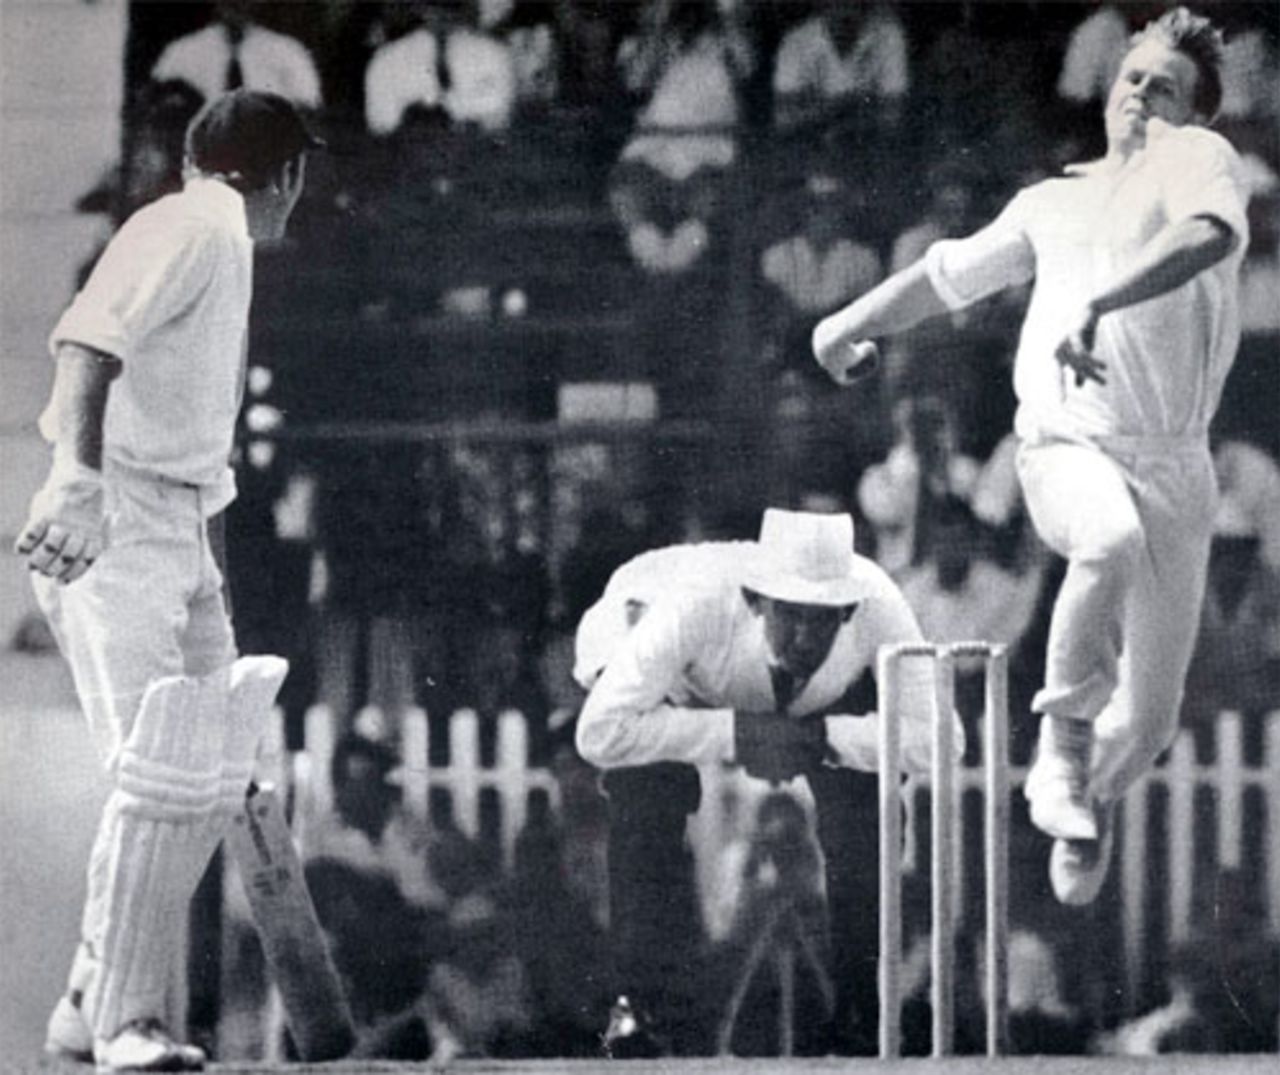 Mike Procter bowling in the third Test, South Africa v Australia, 3rd Test, Johannesburg, February 22, 1970